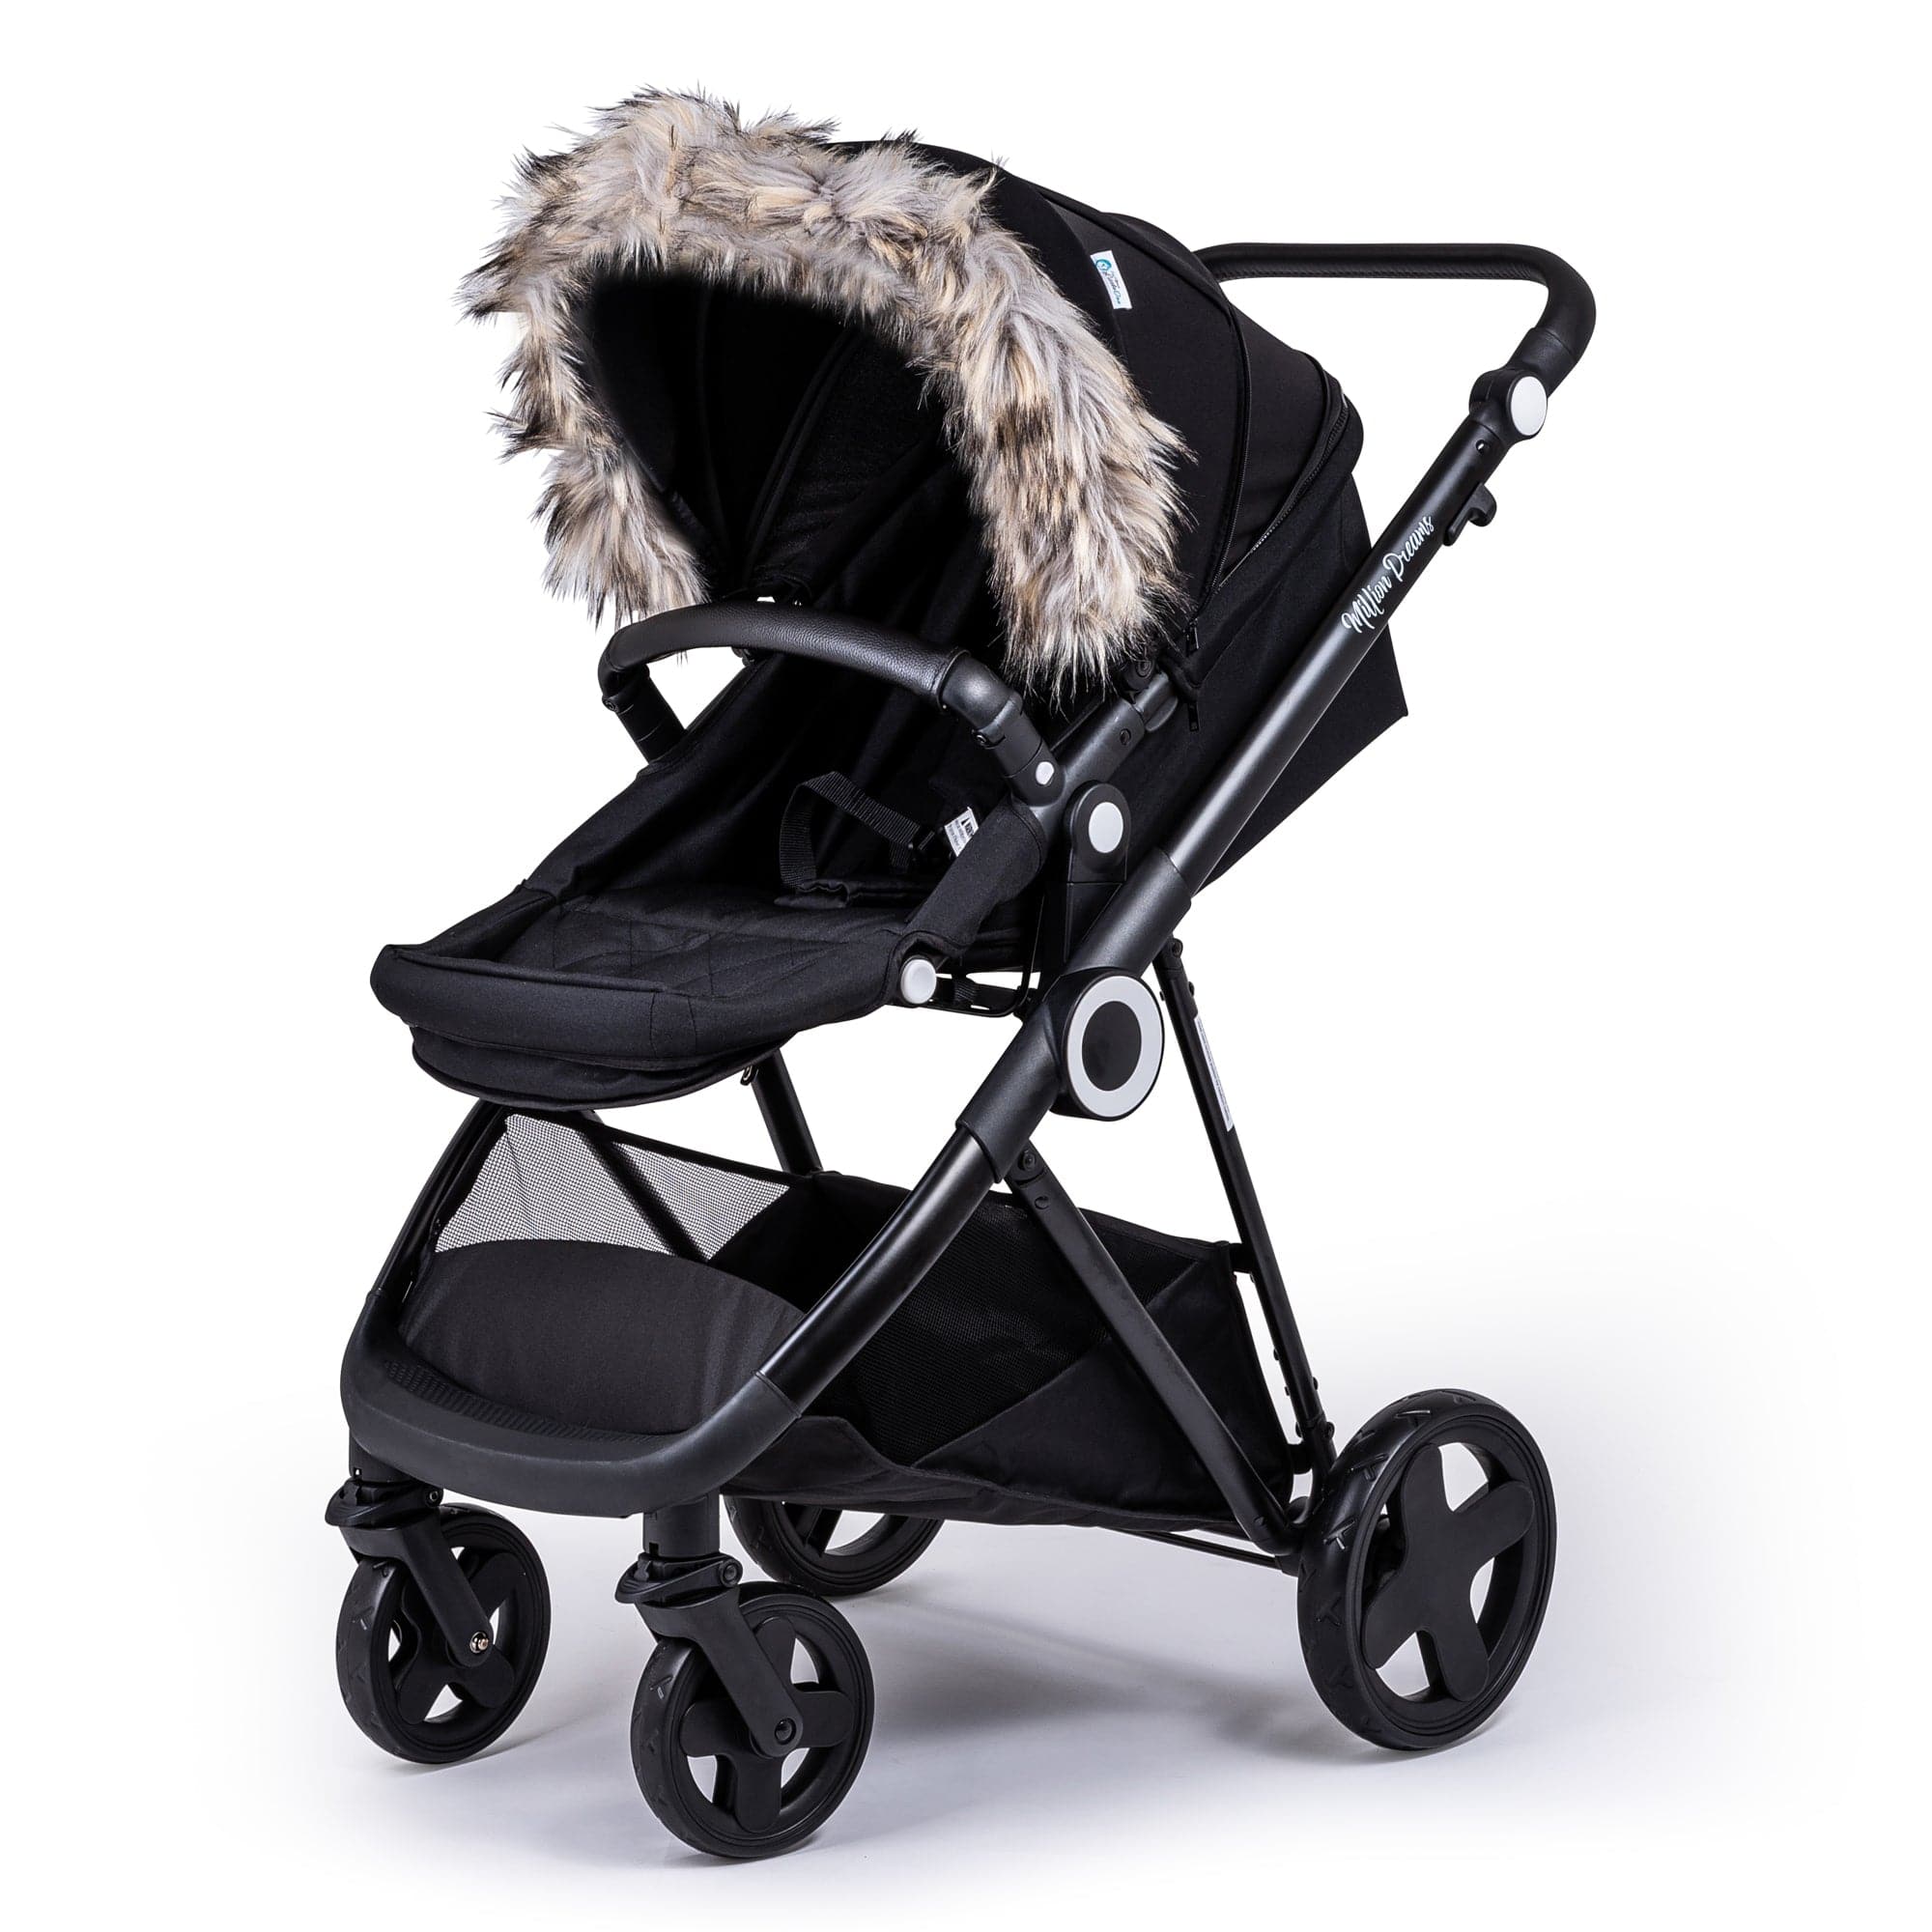 Pram Fur Hood Trim Attachment For Pushchair Compatible with Orbit Baby - Light Grey / Fits All Models | For Your Little One